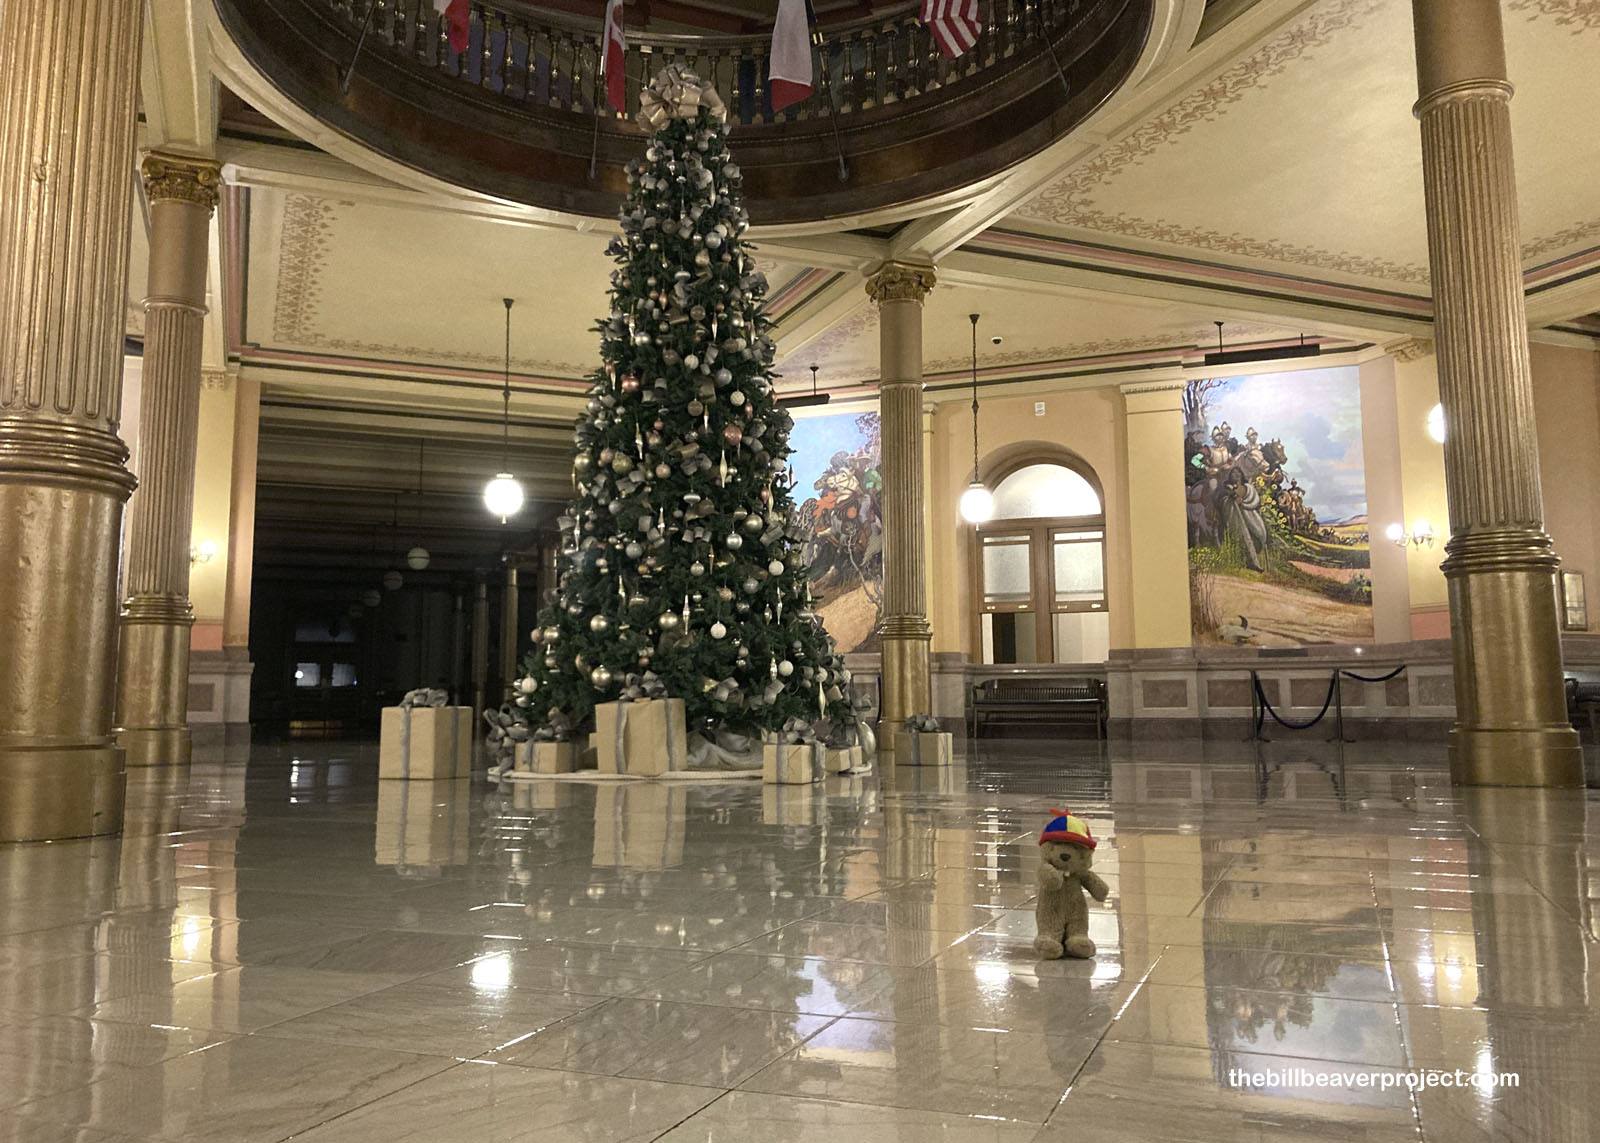 Very festive inside the capitol!